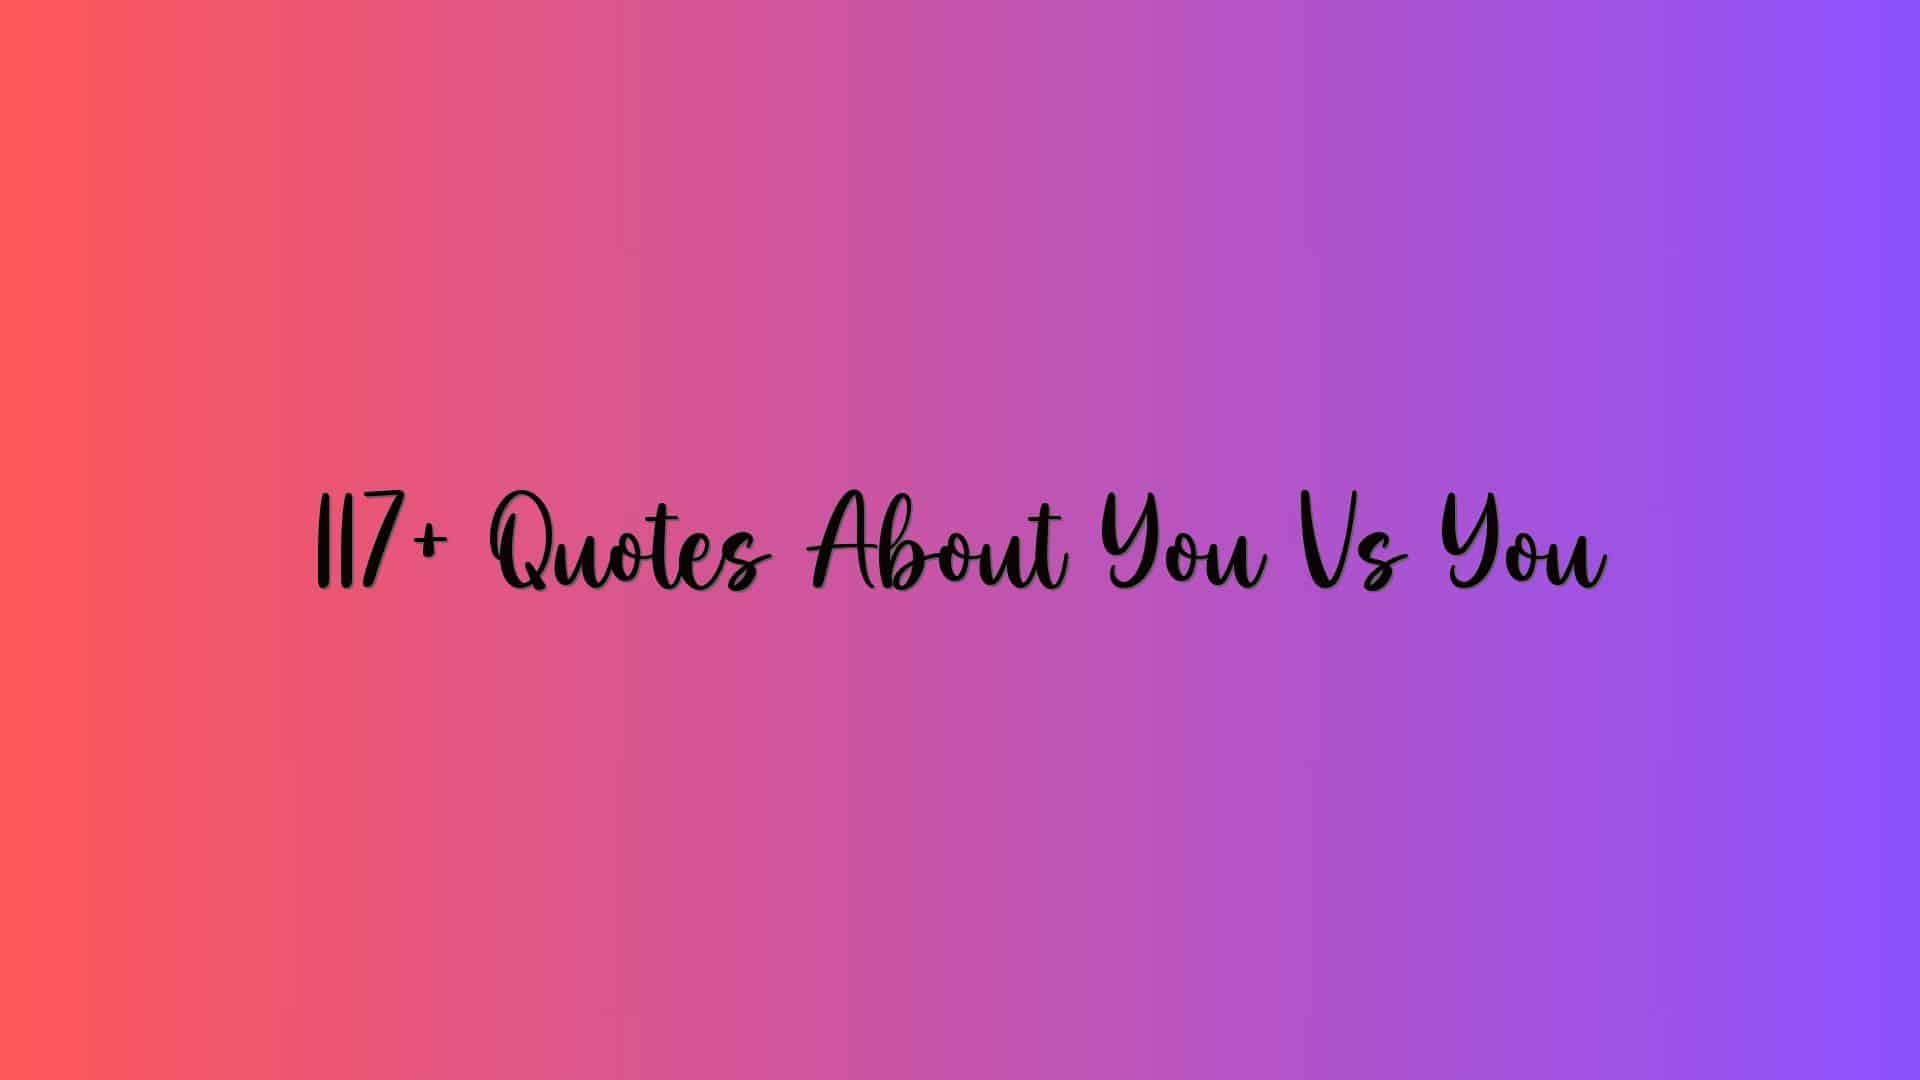 117+ Quotes About You Vs You